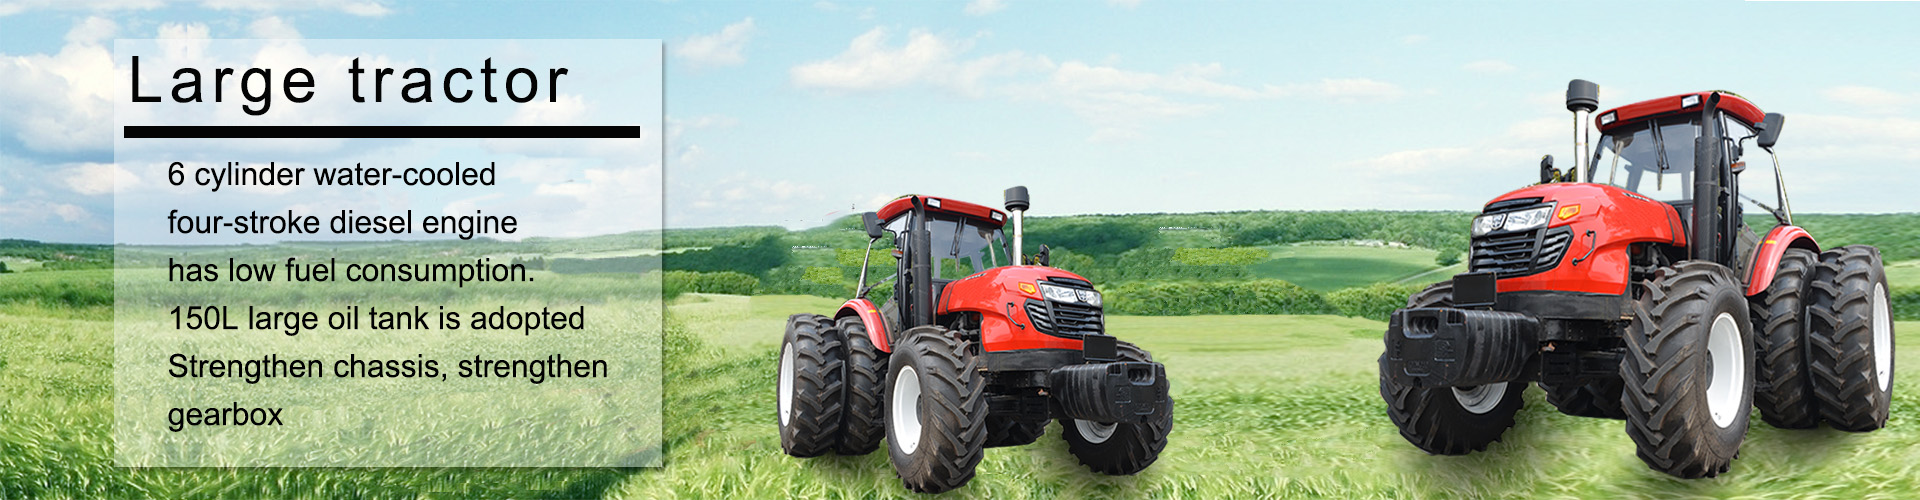 Agricultural machinery manufacturers and sellers